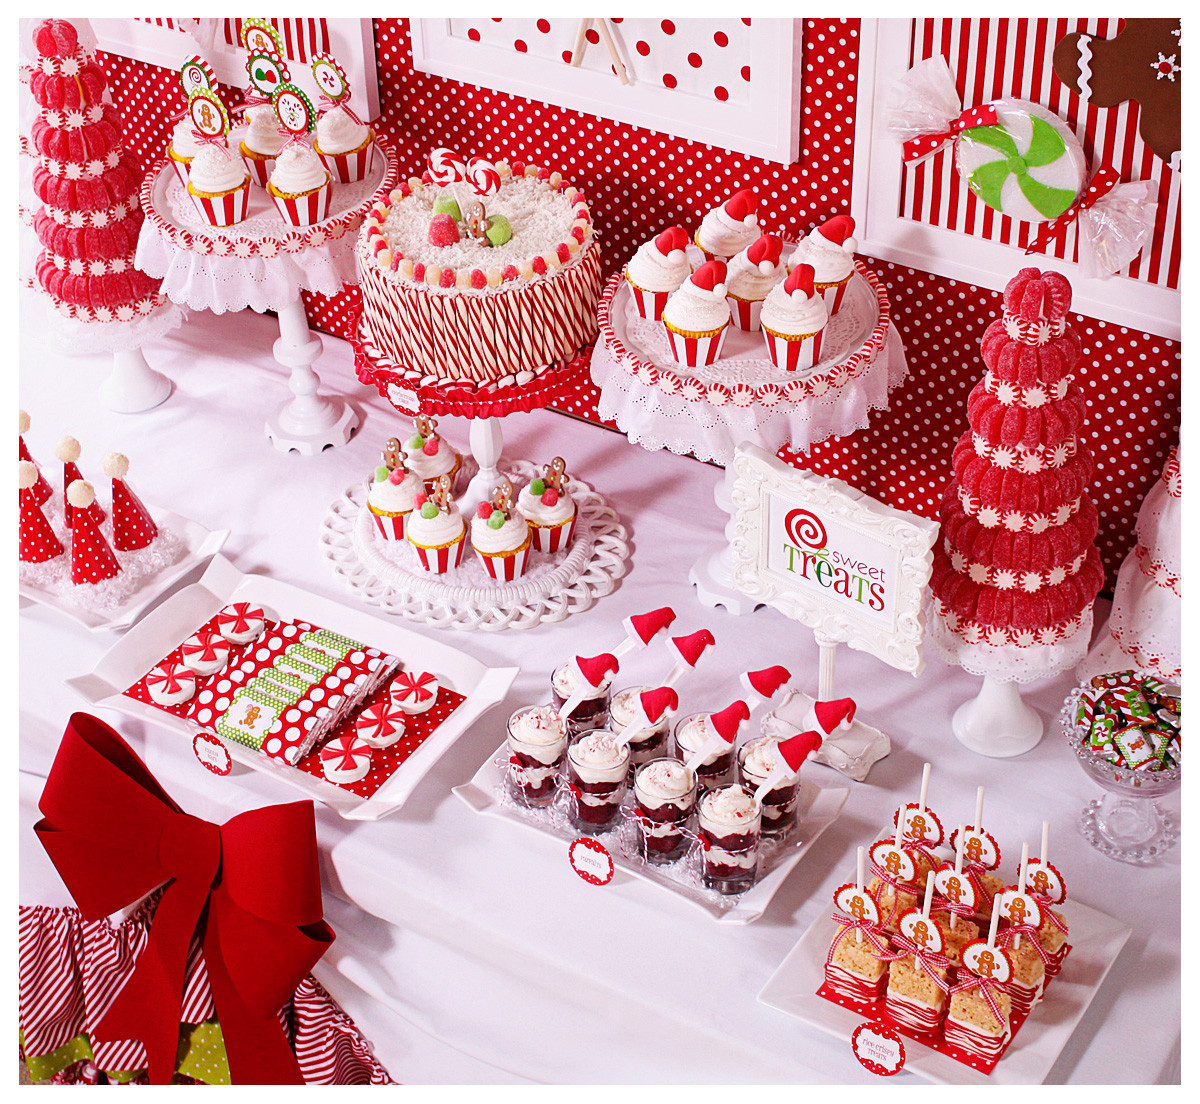 Christmas Party Desserts
 Amanda s Parties To Go Candy Christmas Dessert Table